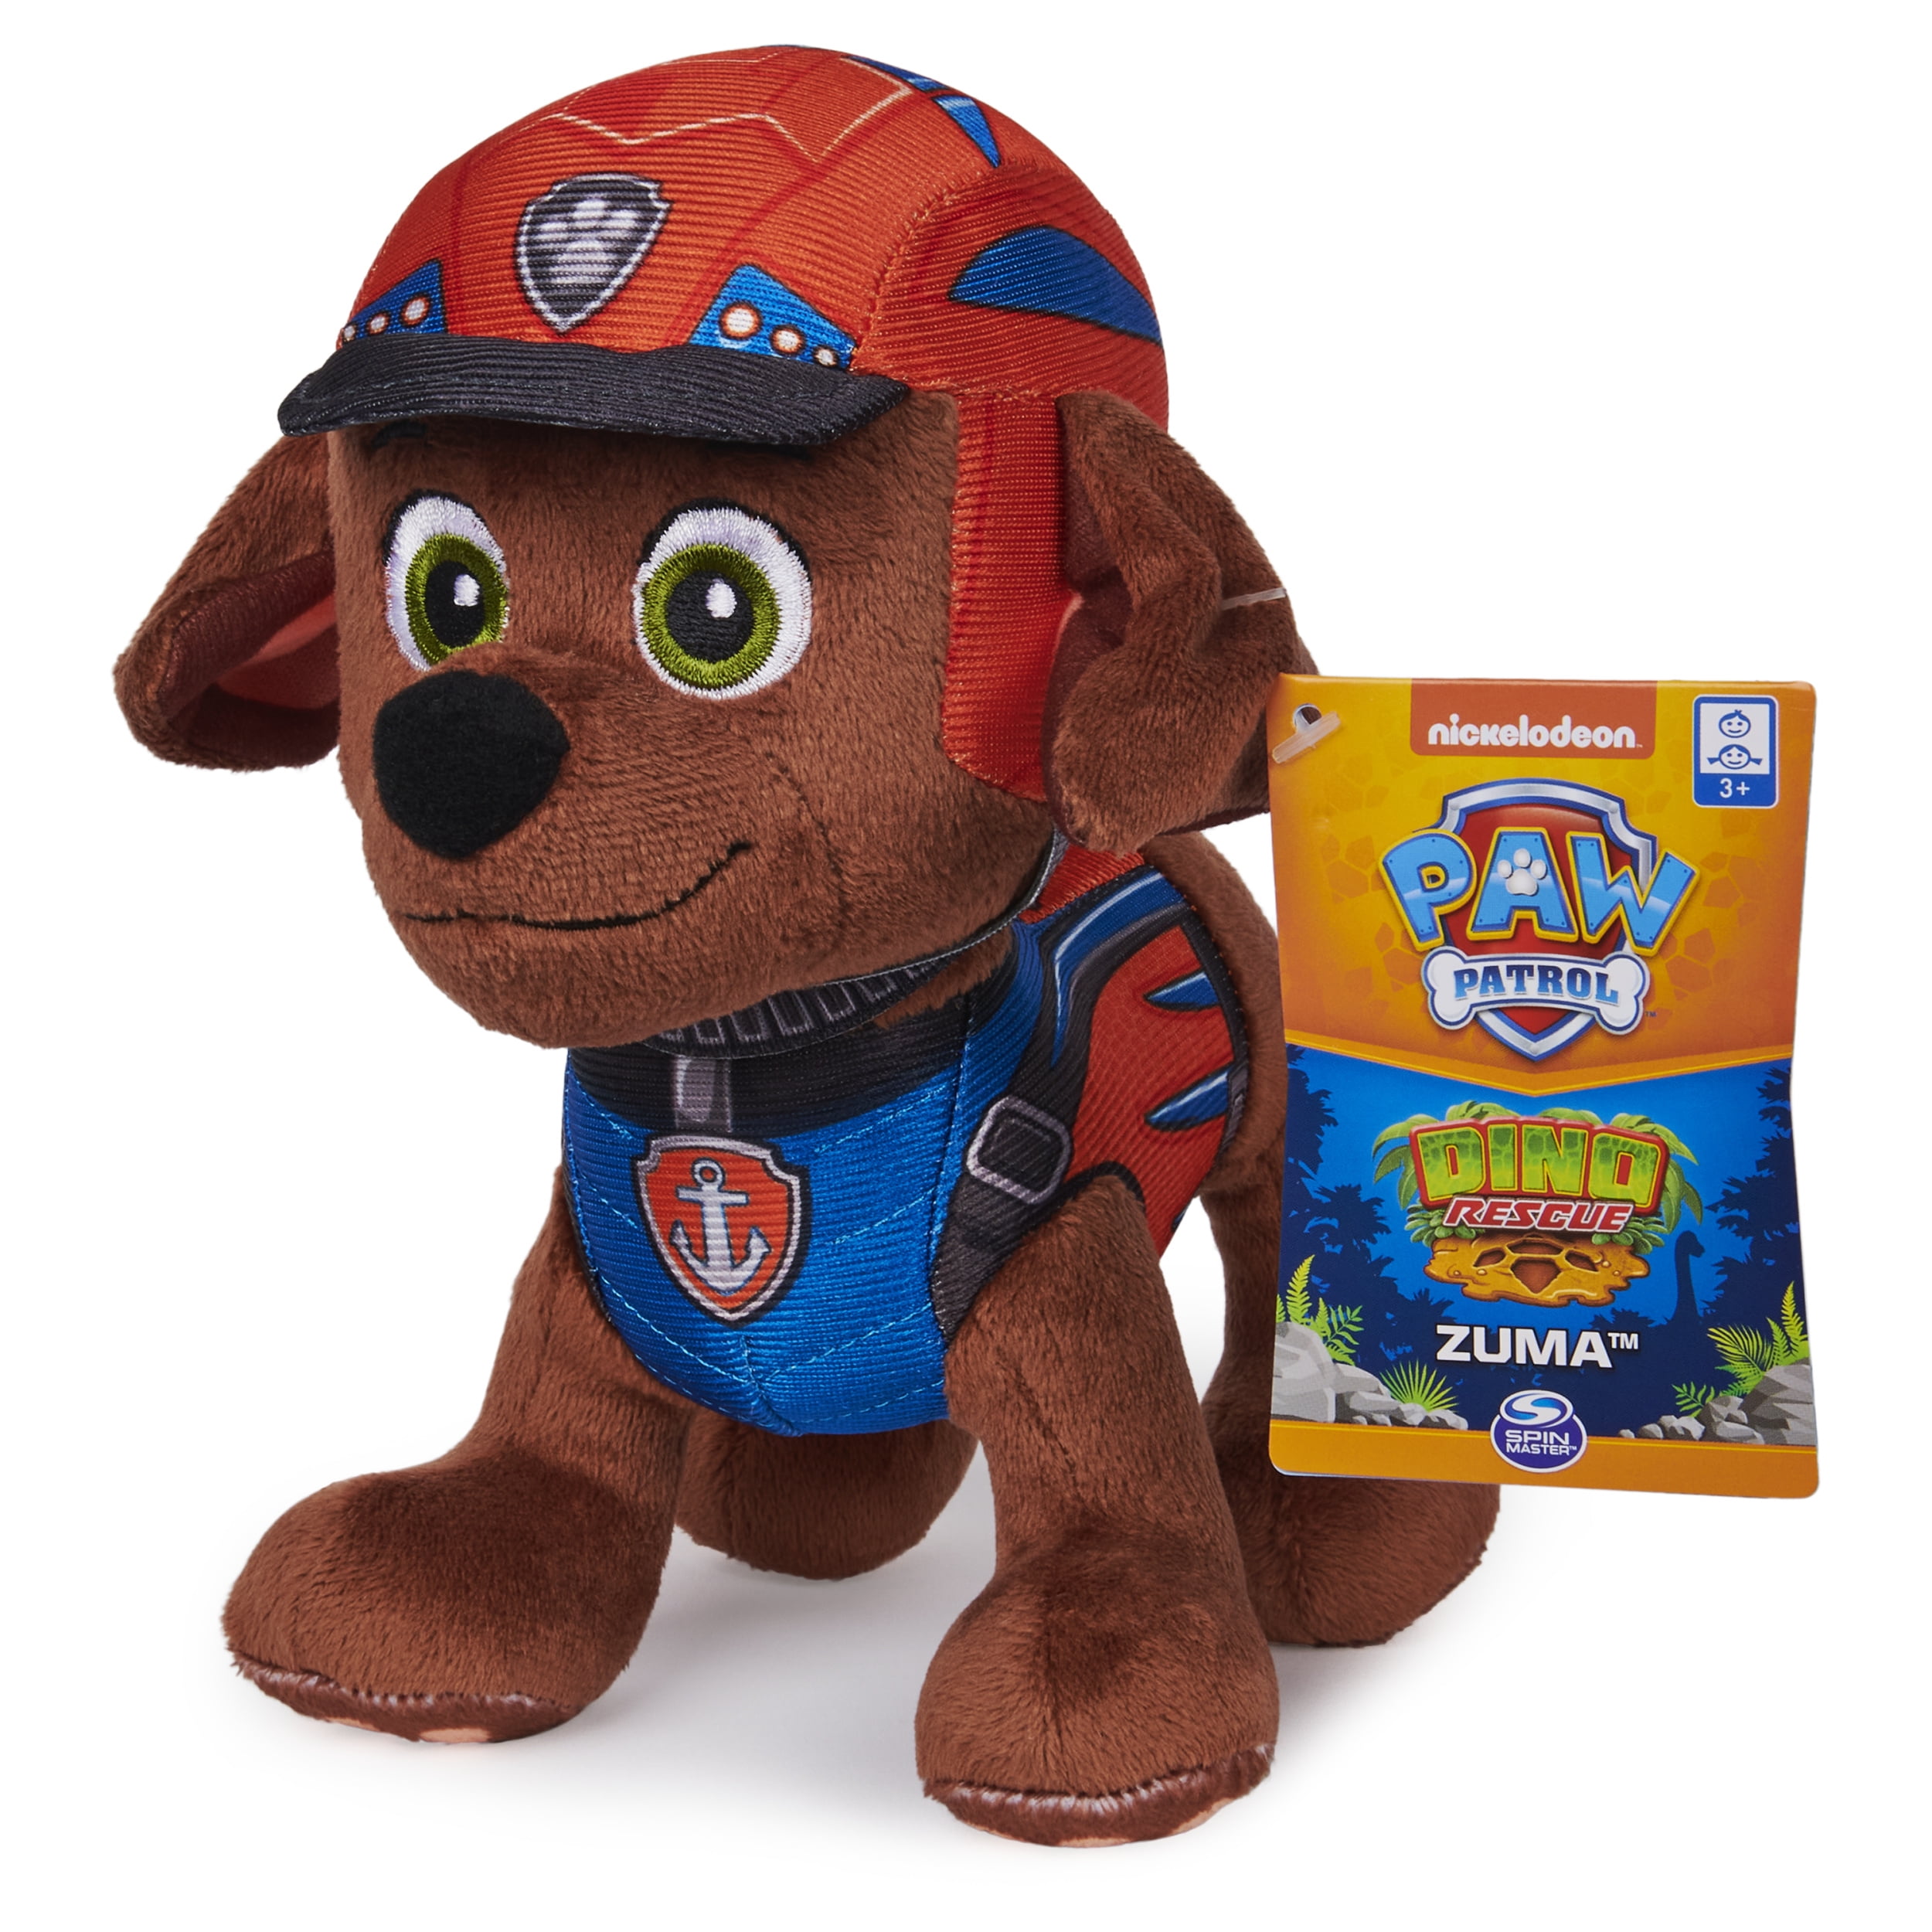 NEW OFFICIAL 12" PAW PATROL SITTING ZUMA PUP PLUSH SOFT TOY NICKELODEON DOGS 